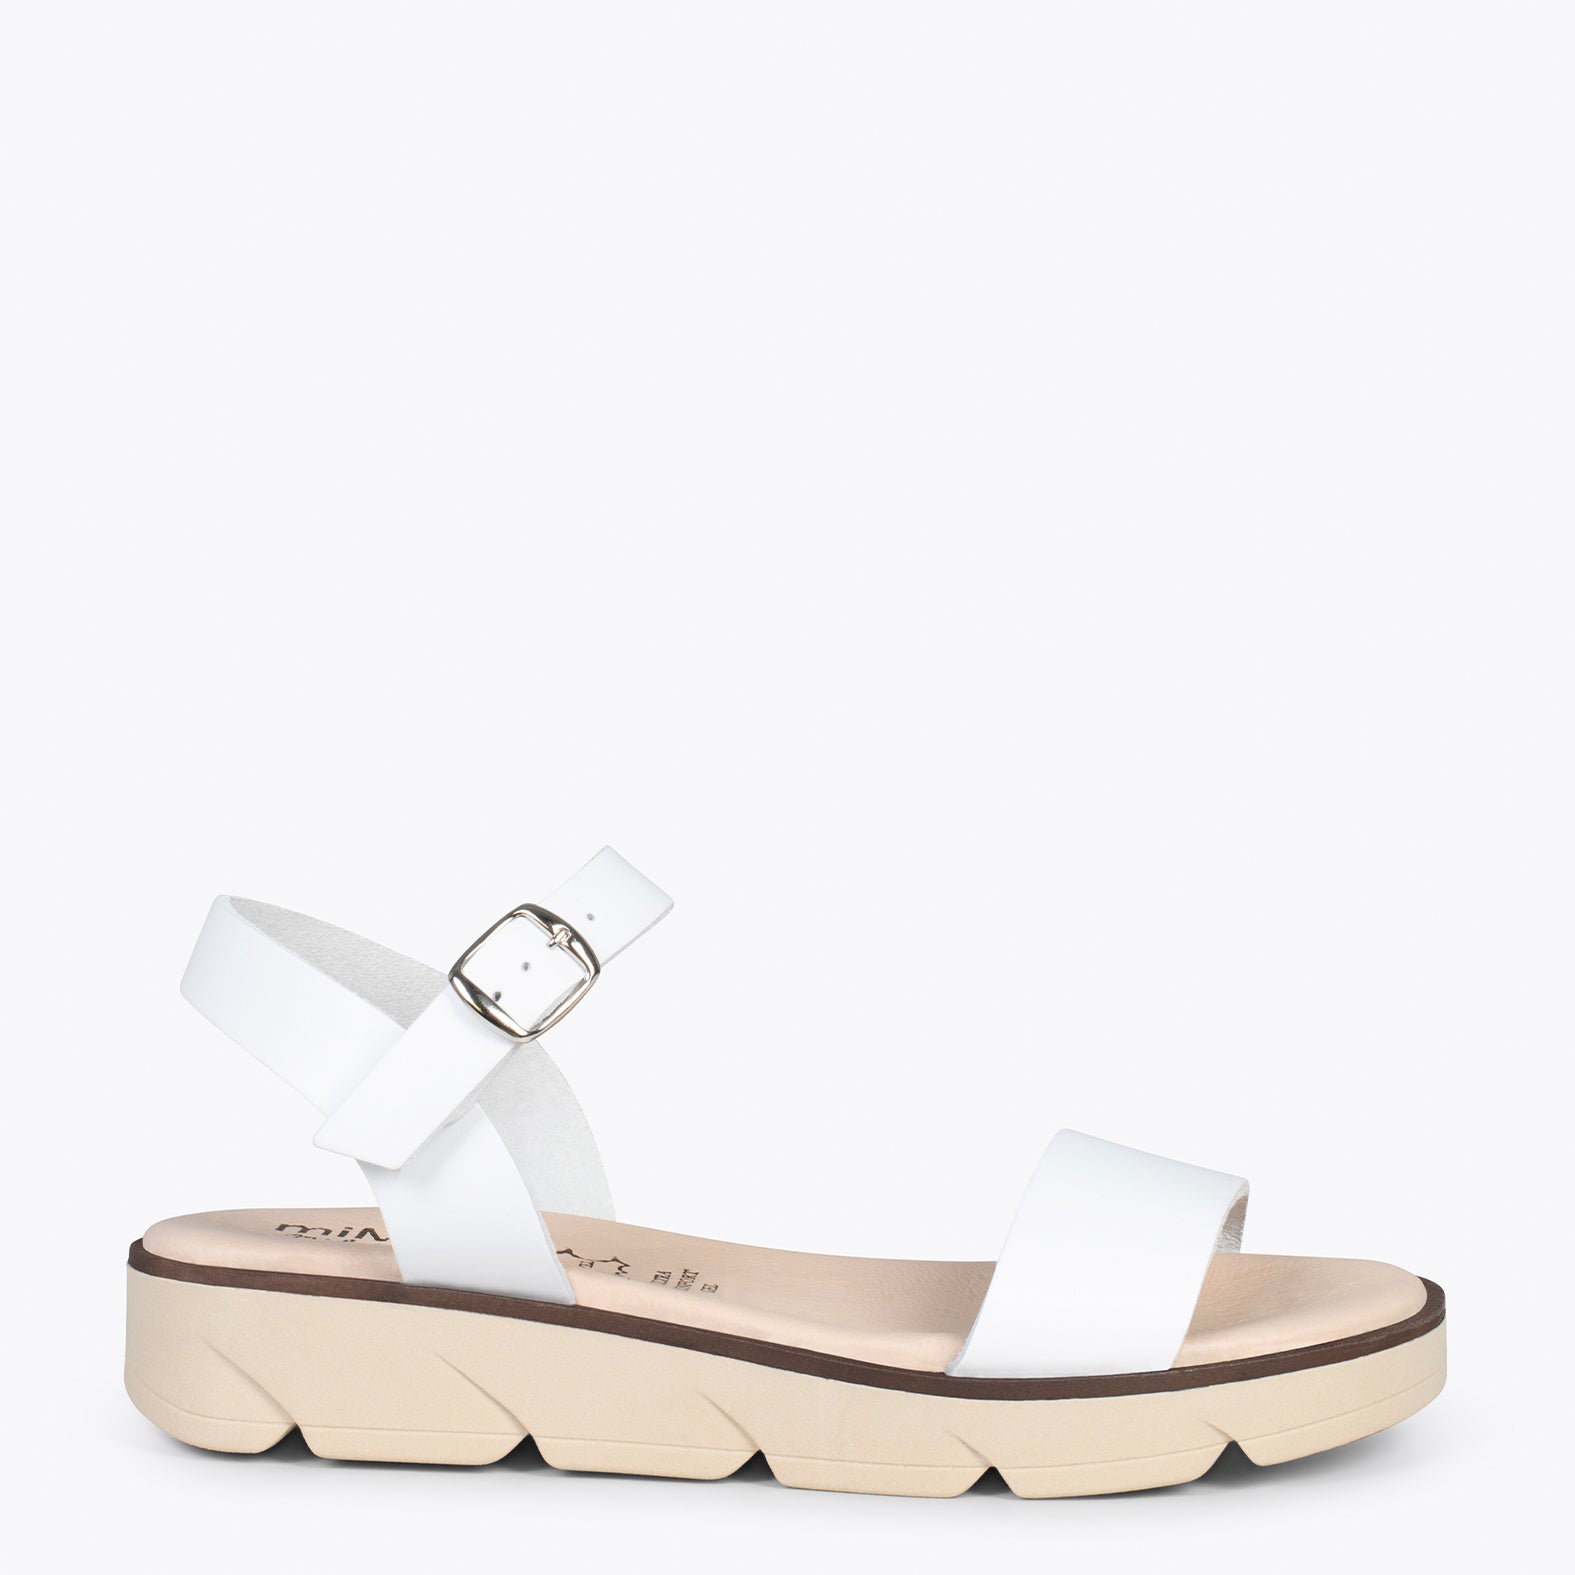 RIVER – WHITE leather flat sandals with wedge